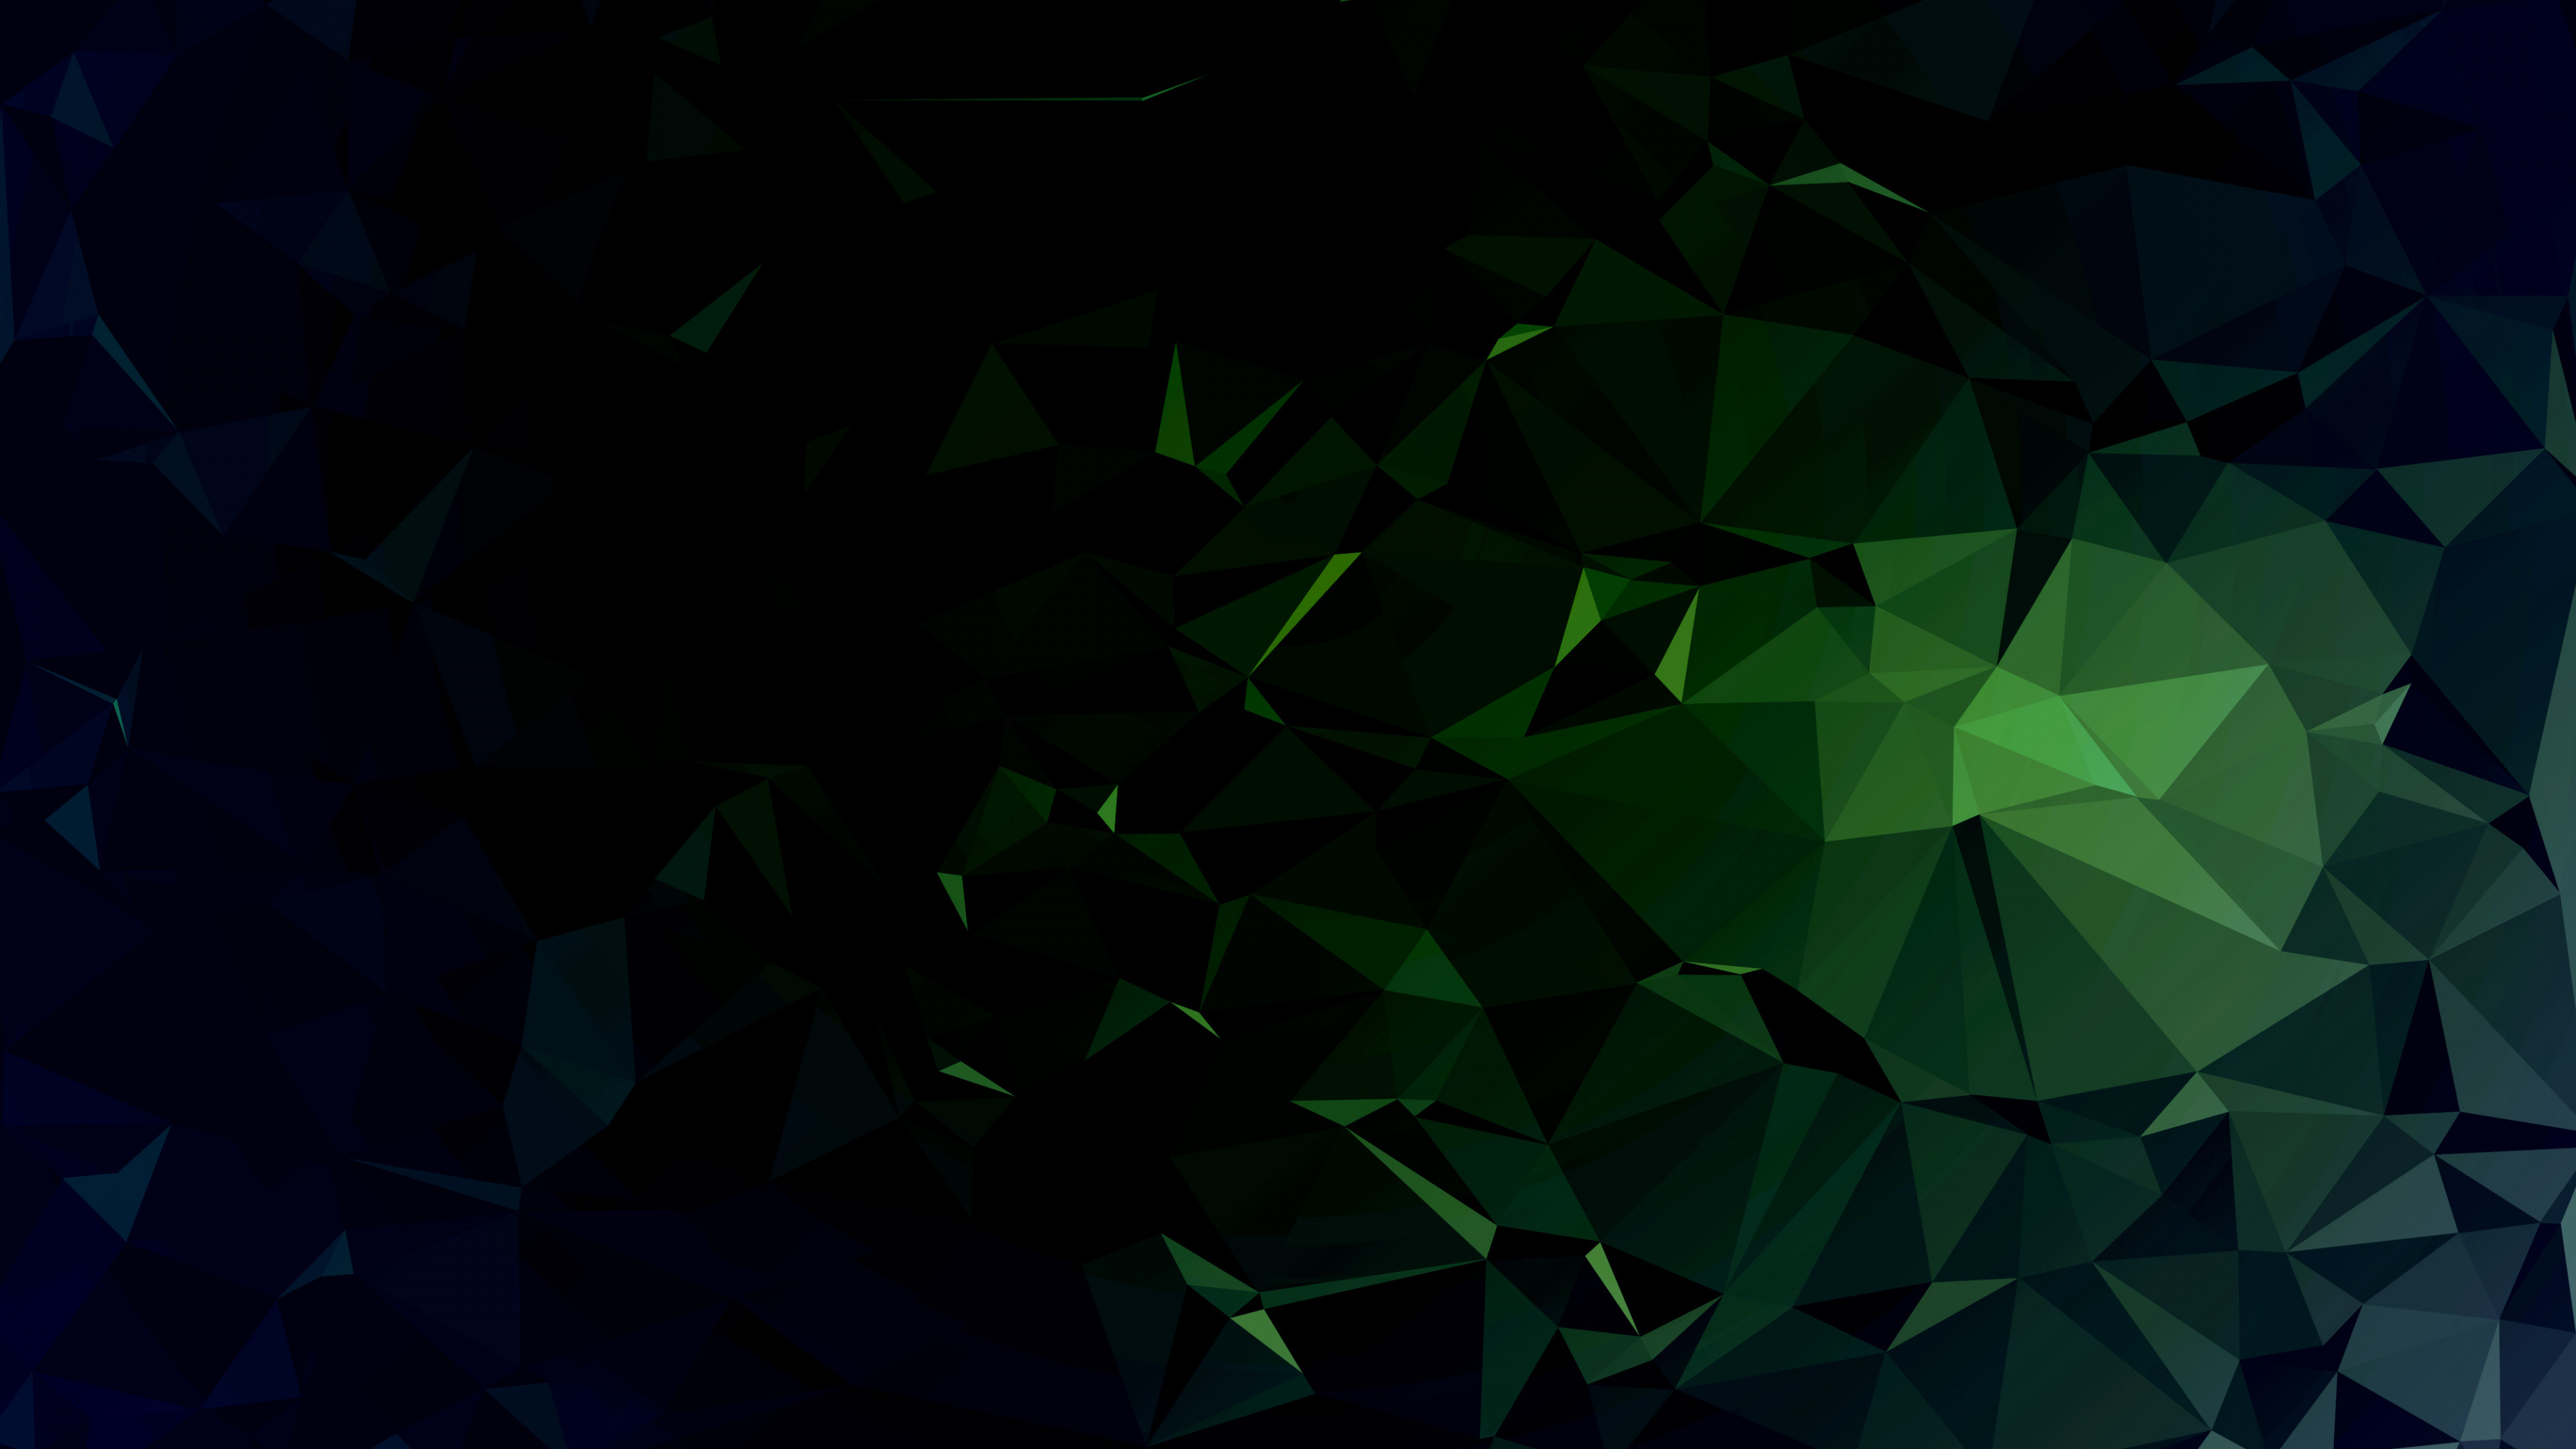 Graphic: Asymmetry design, Low polygonal art, Green shapes, Angles, Apexes. 3840x2160 4K Background.